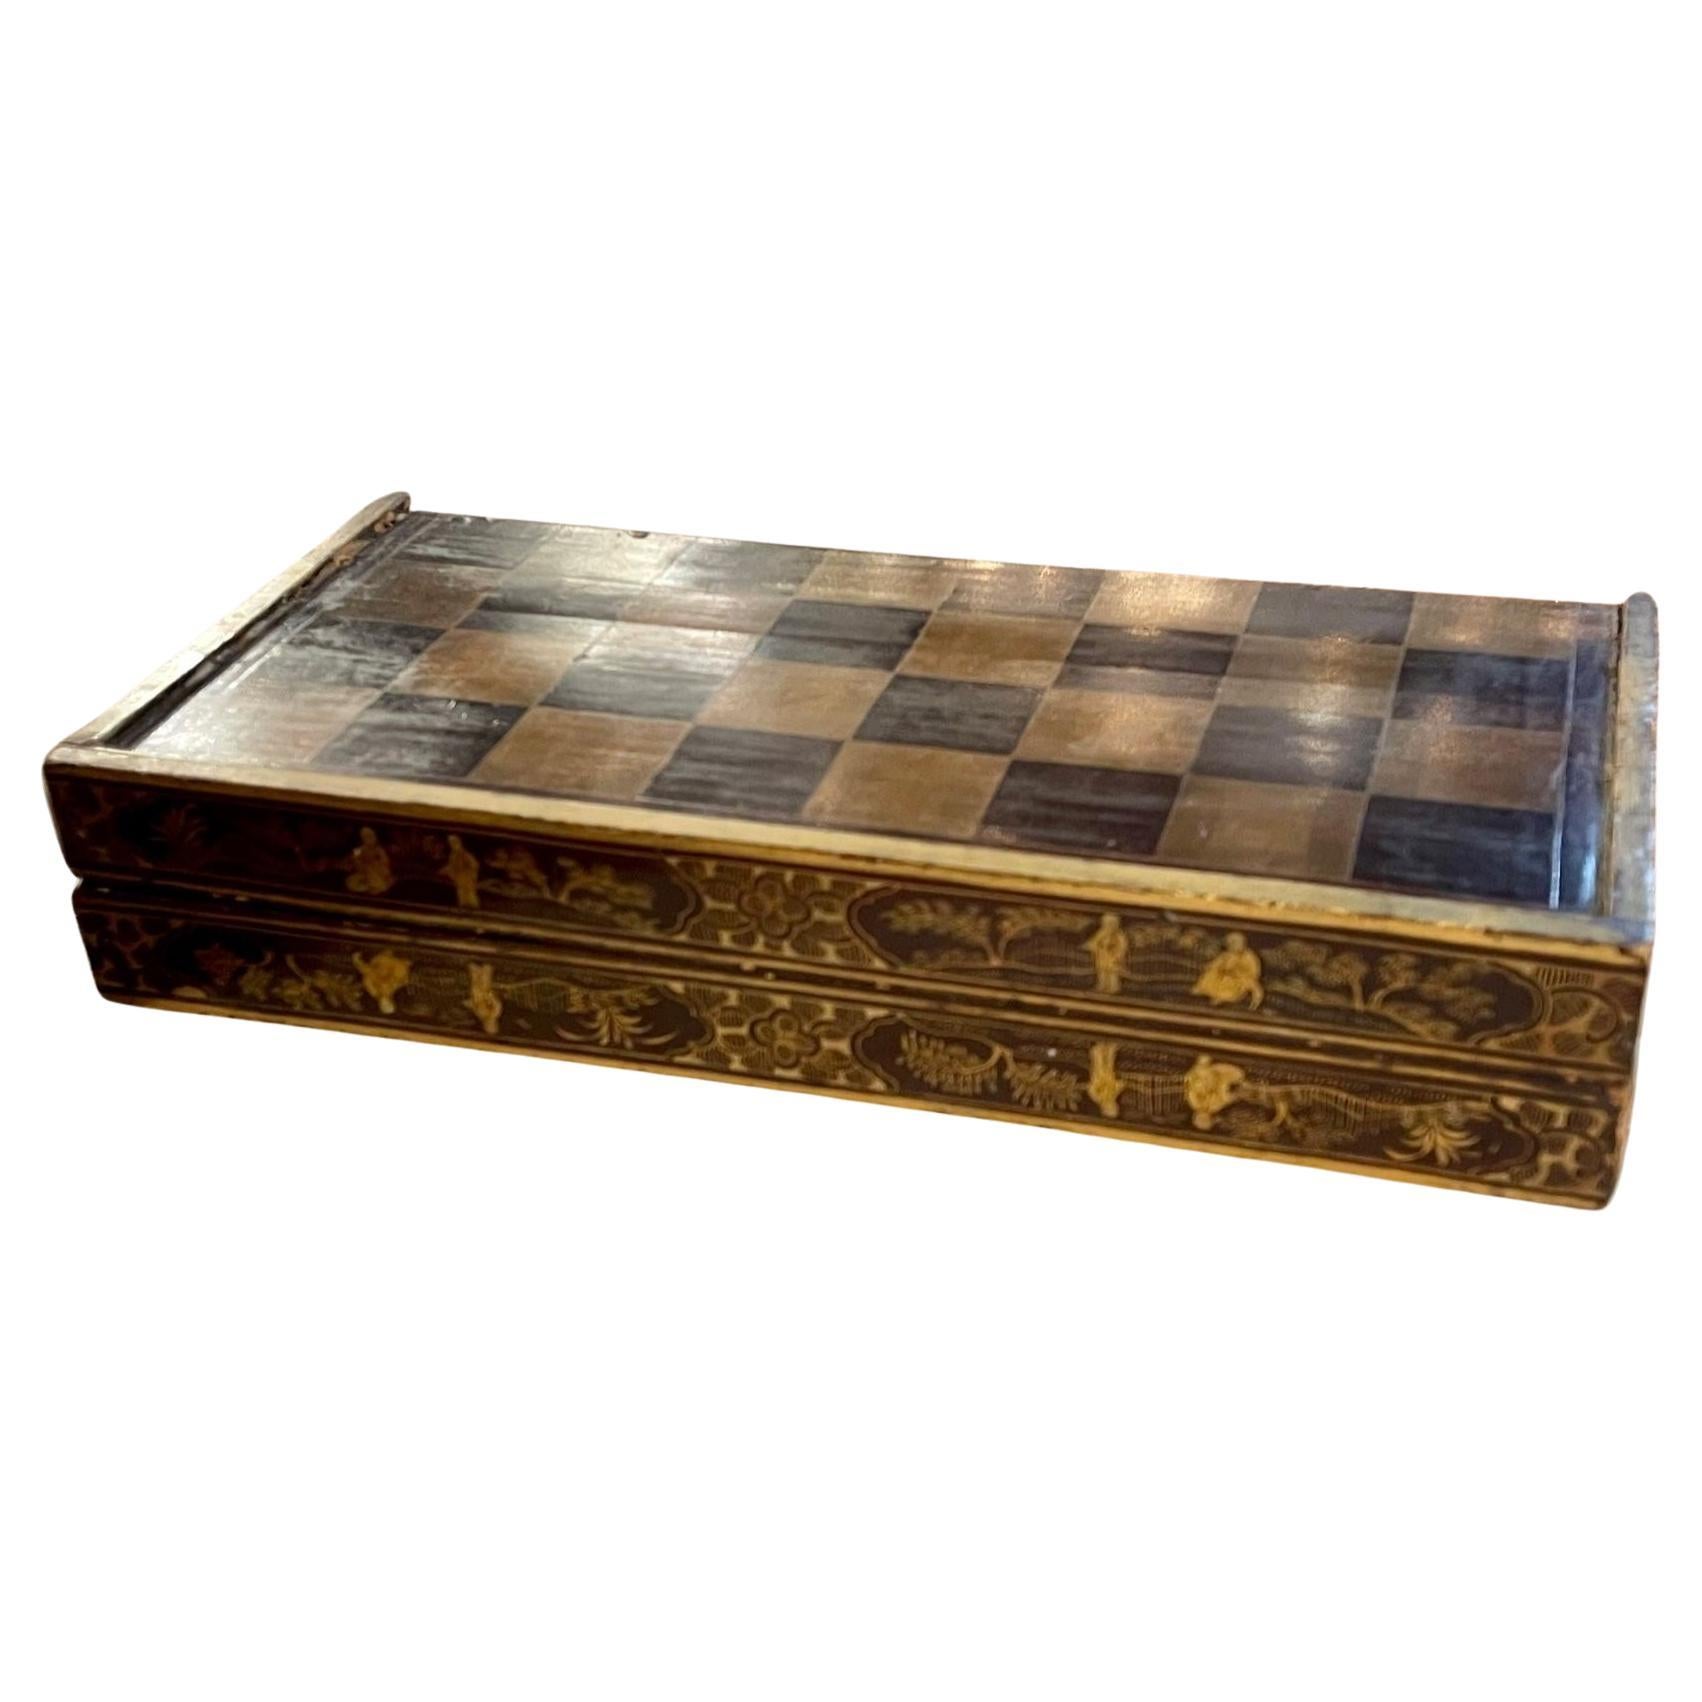 Antique English Chinoiserie Games Box